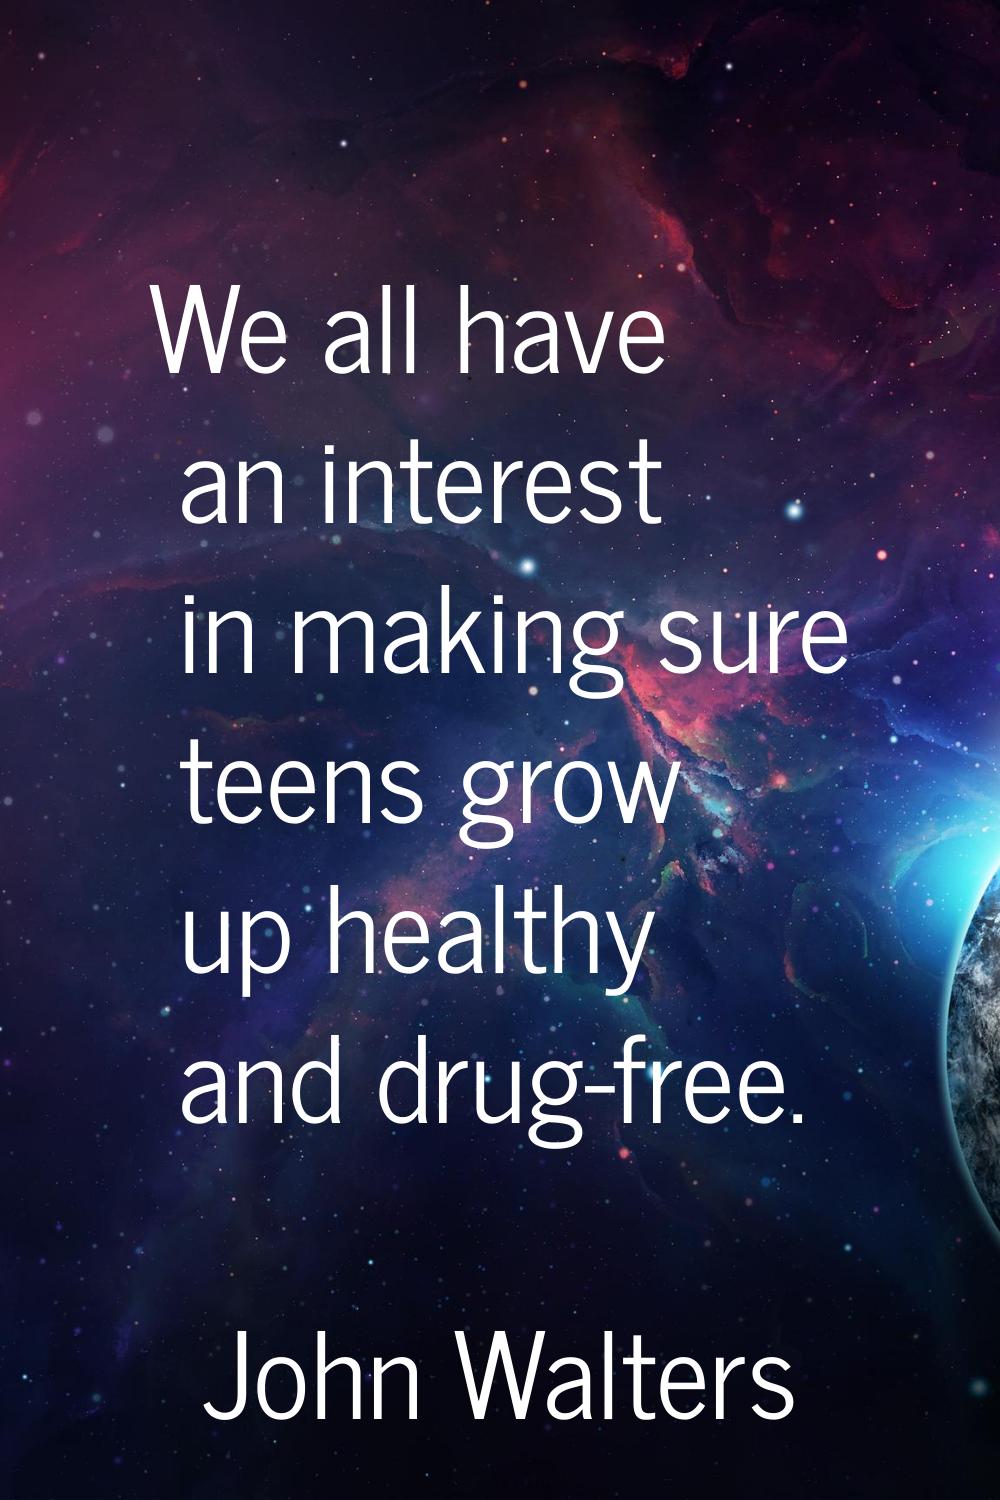 We all have an interest in making sure teens grow up healthy and drug-free.